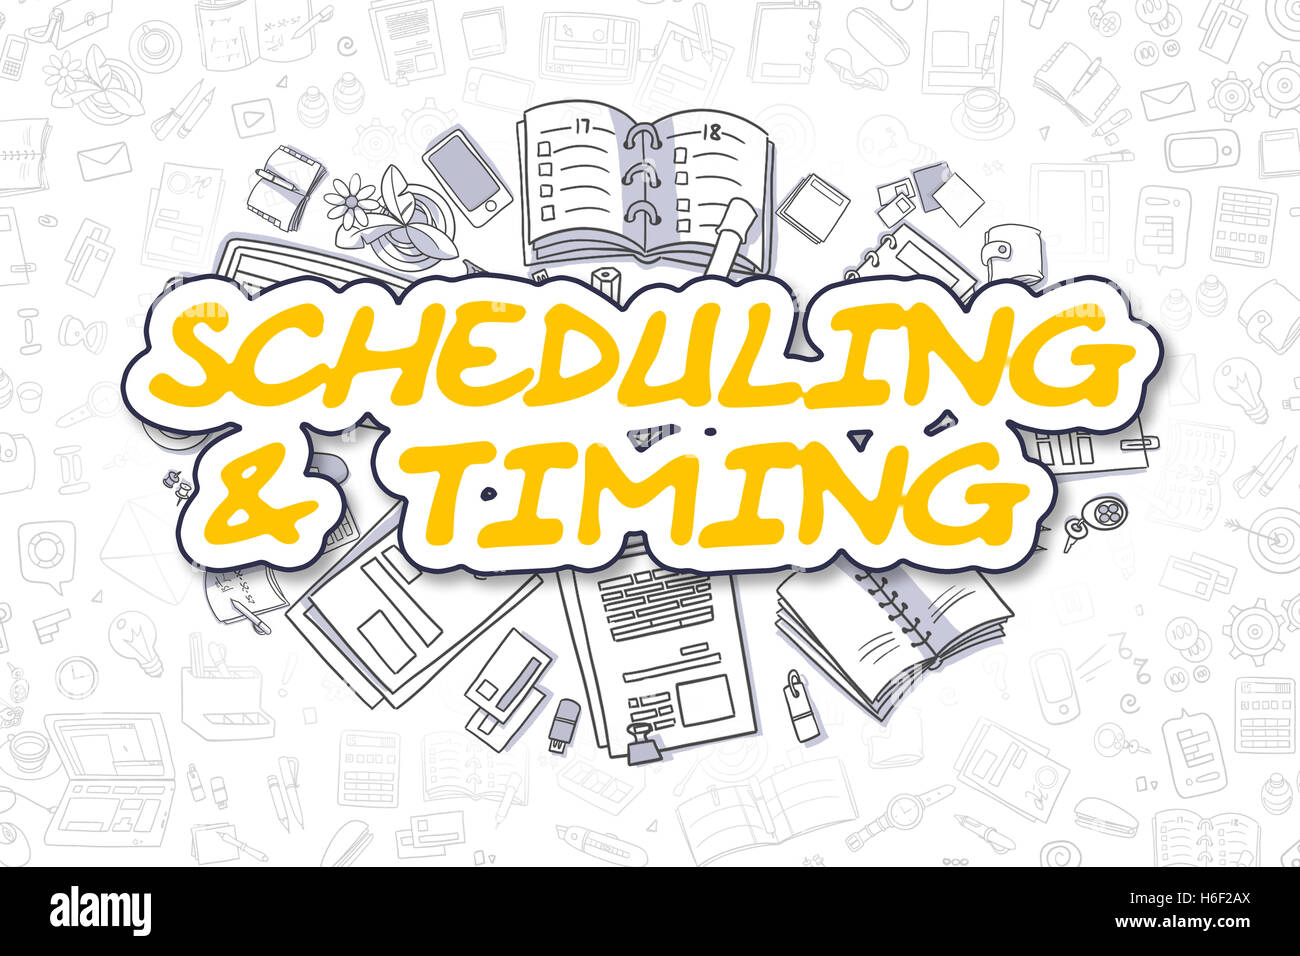 Scheduling And Timing - Business Concept. Stock Photo